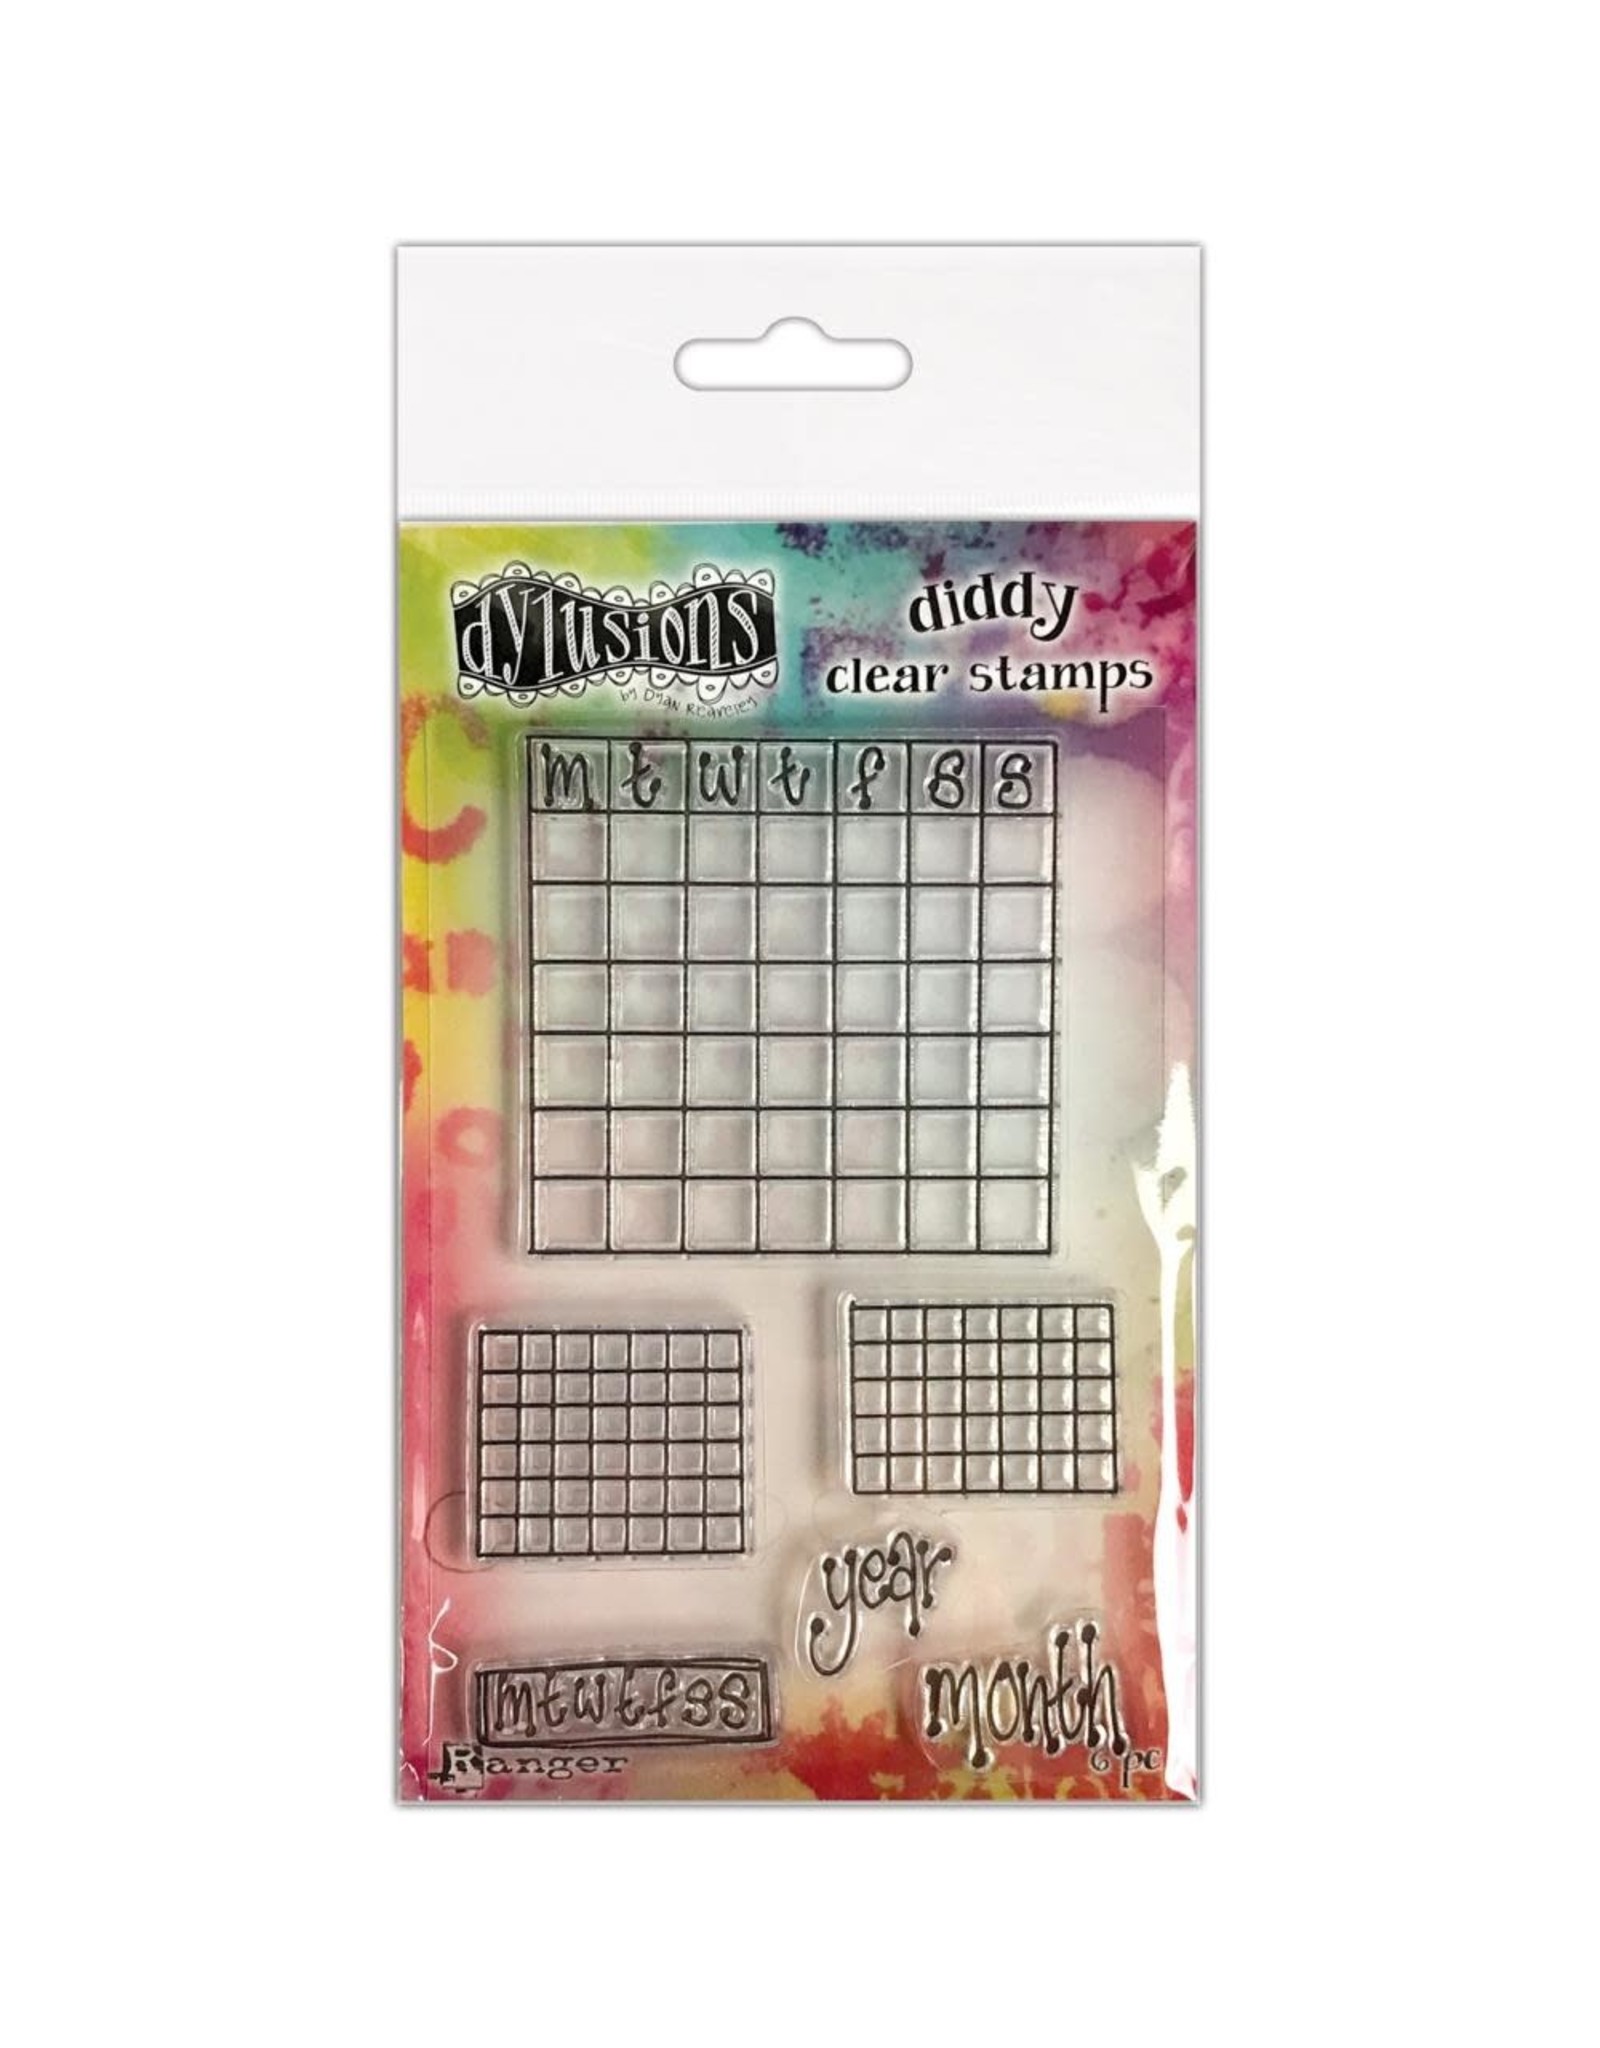 RANGER DYLUSIONS CHECK IT OUT DIDDY CLEAR STAMP SET